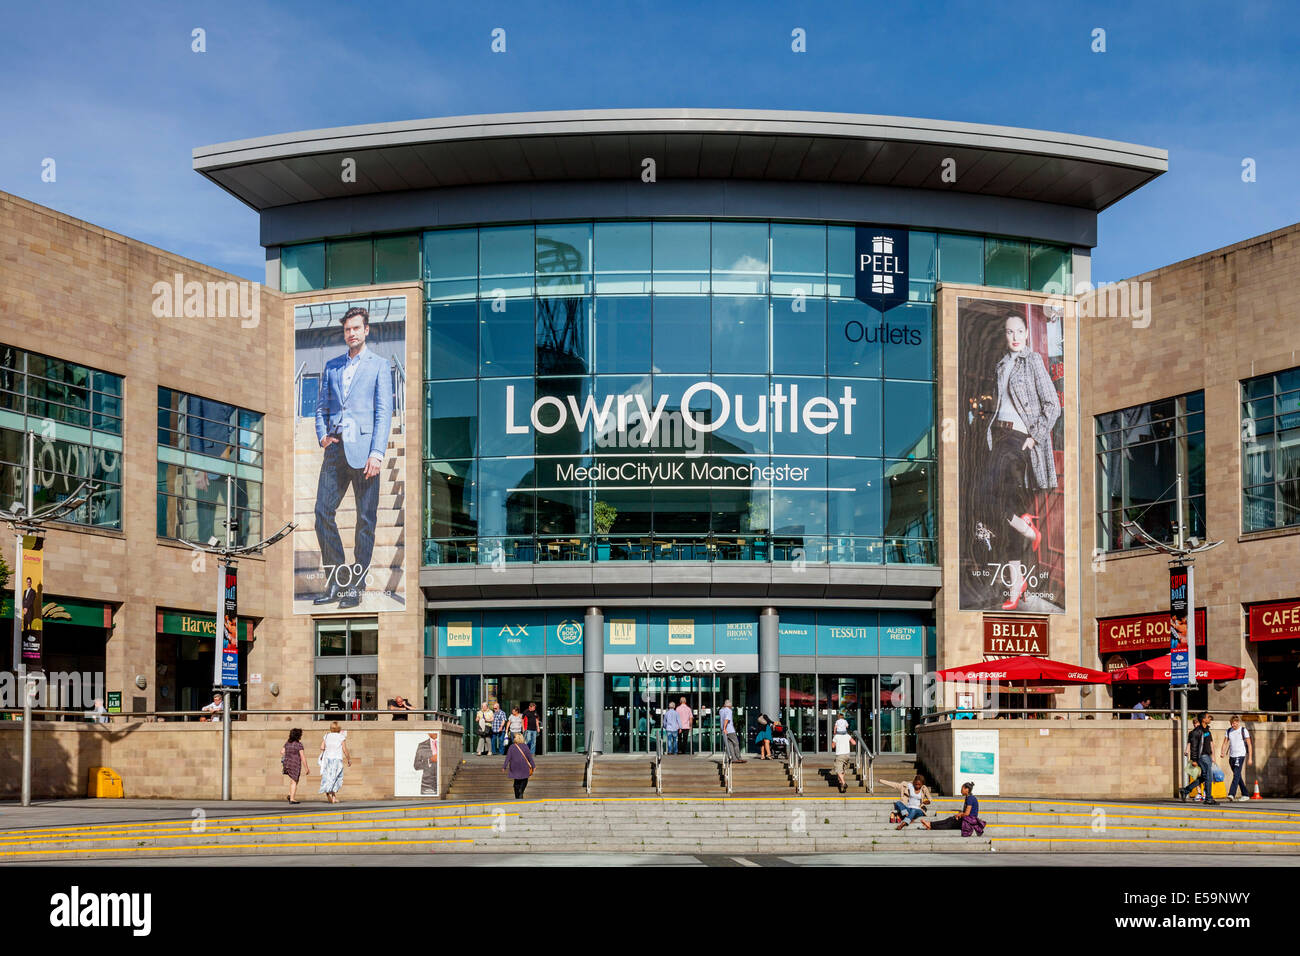 The Lowry Outlet, Salford Quays, Manchester, England Stock Photo